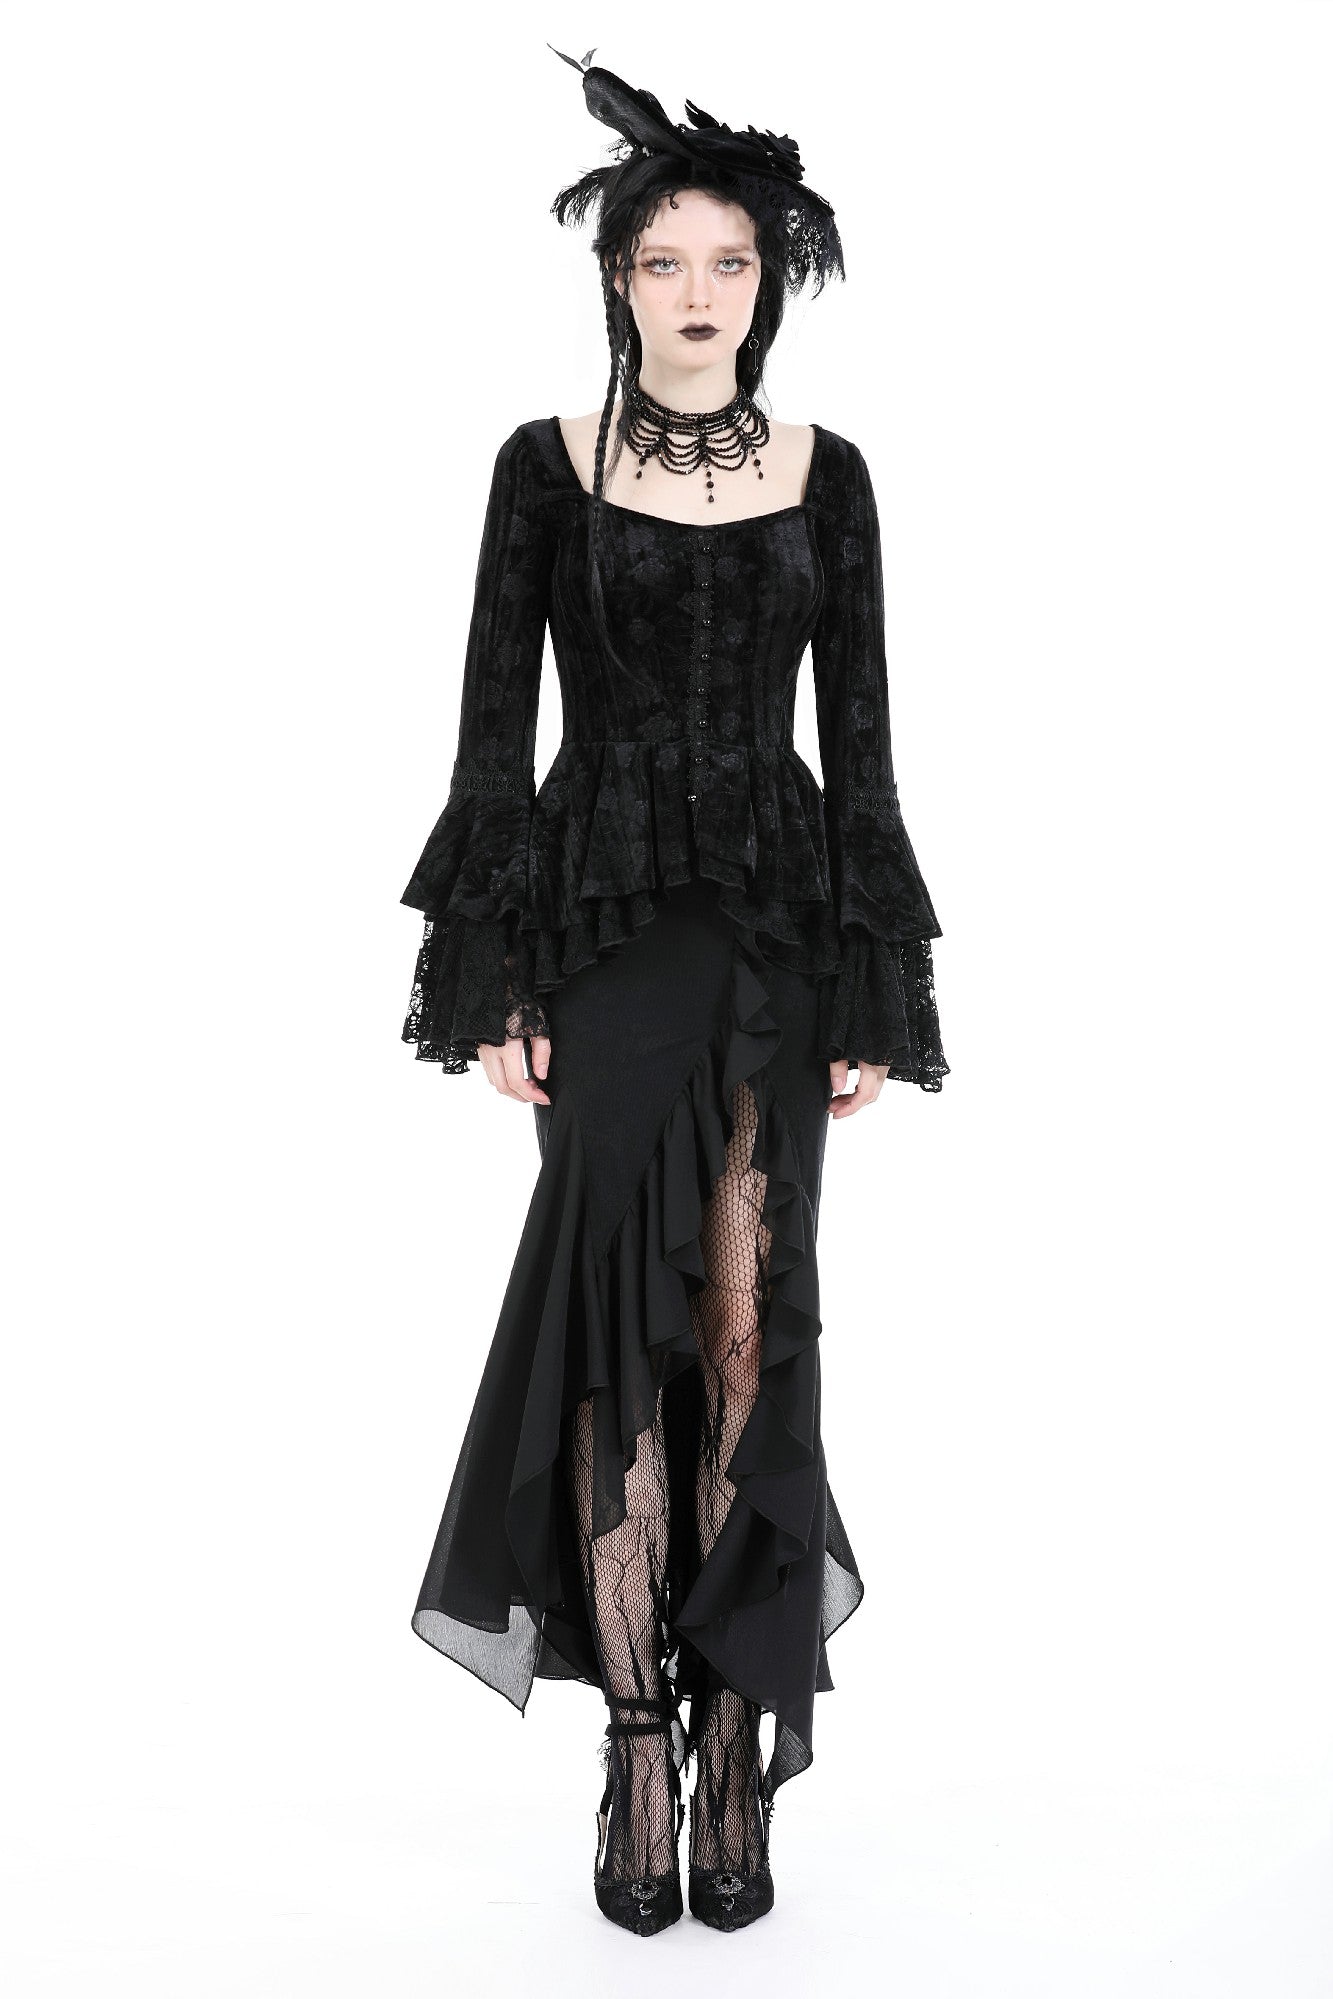 Roses For The Dead Gothic Lace Velvet Top by Dark In Love